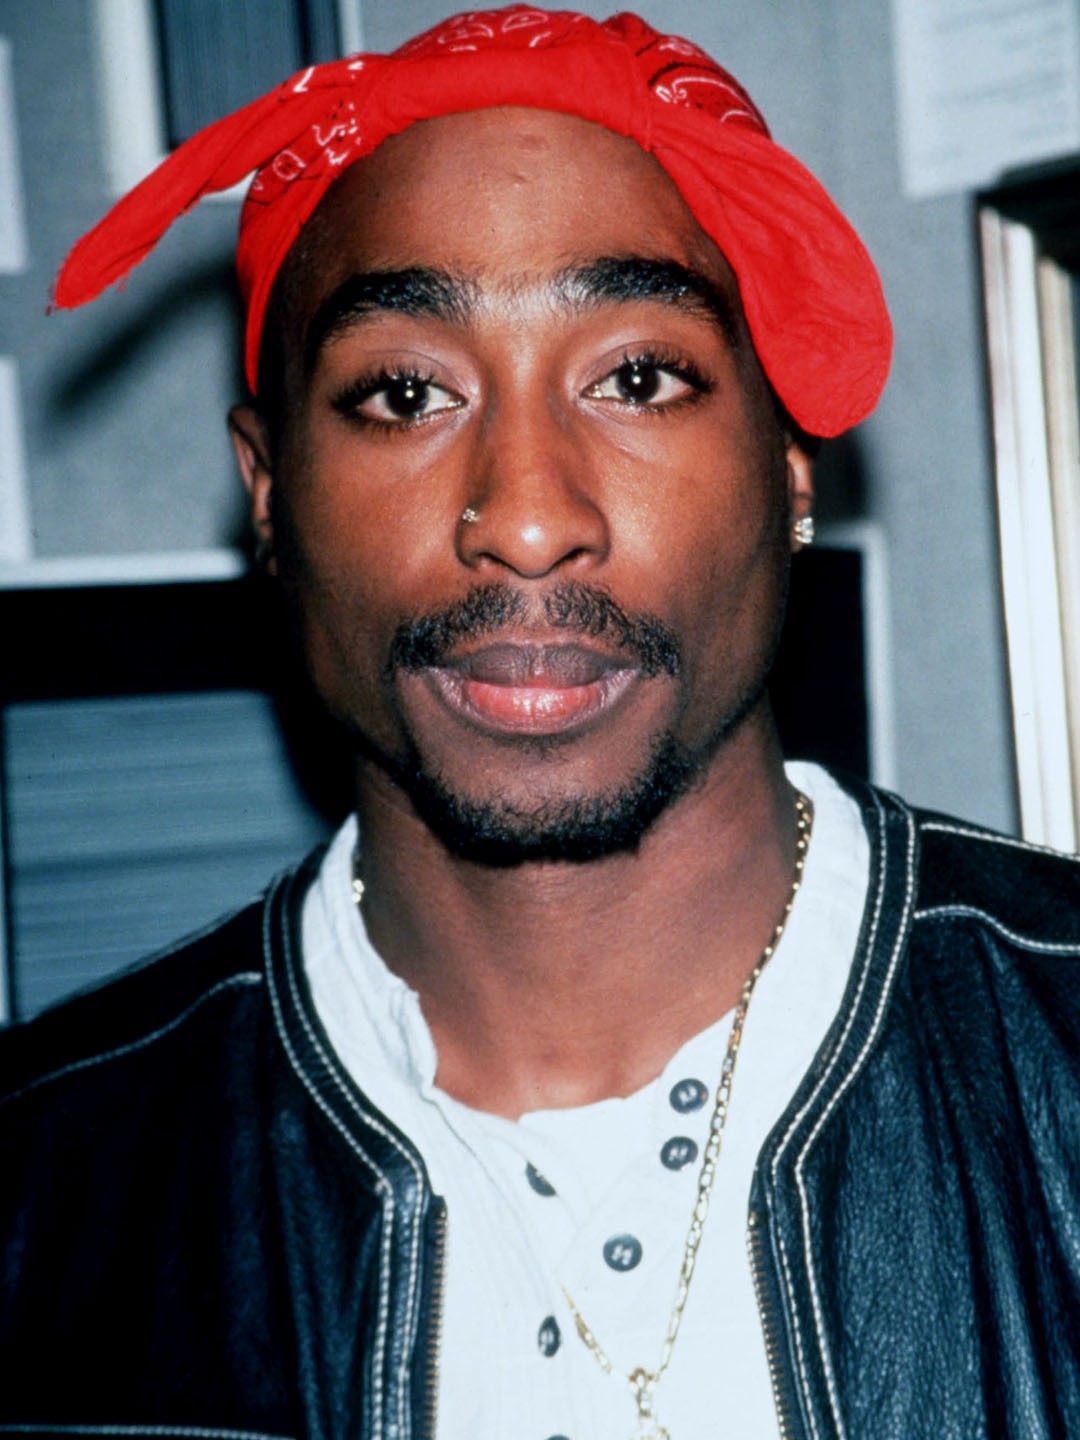 How 2Pac's 'Me Against The World' Album Broke Records